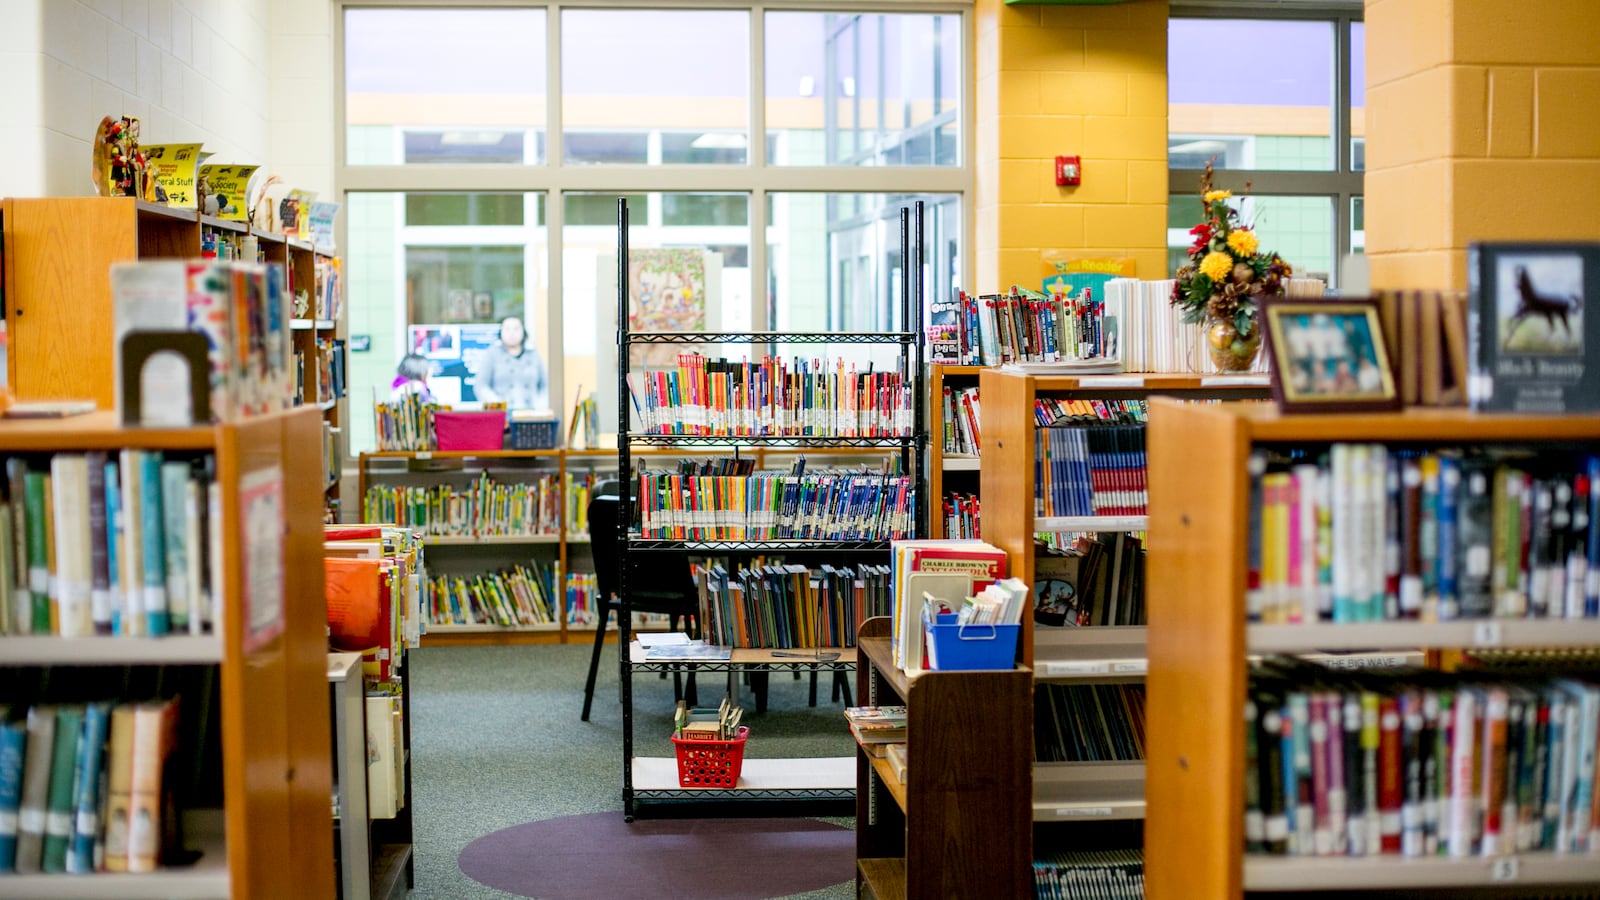 The school library at Earhart Elementary-Middle School in southwest Detroit.